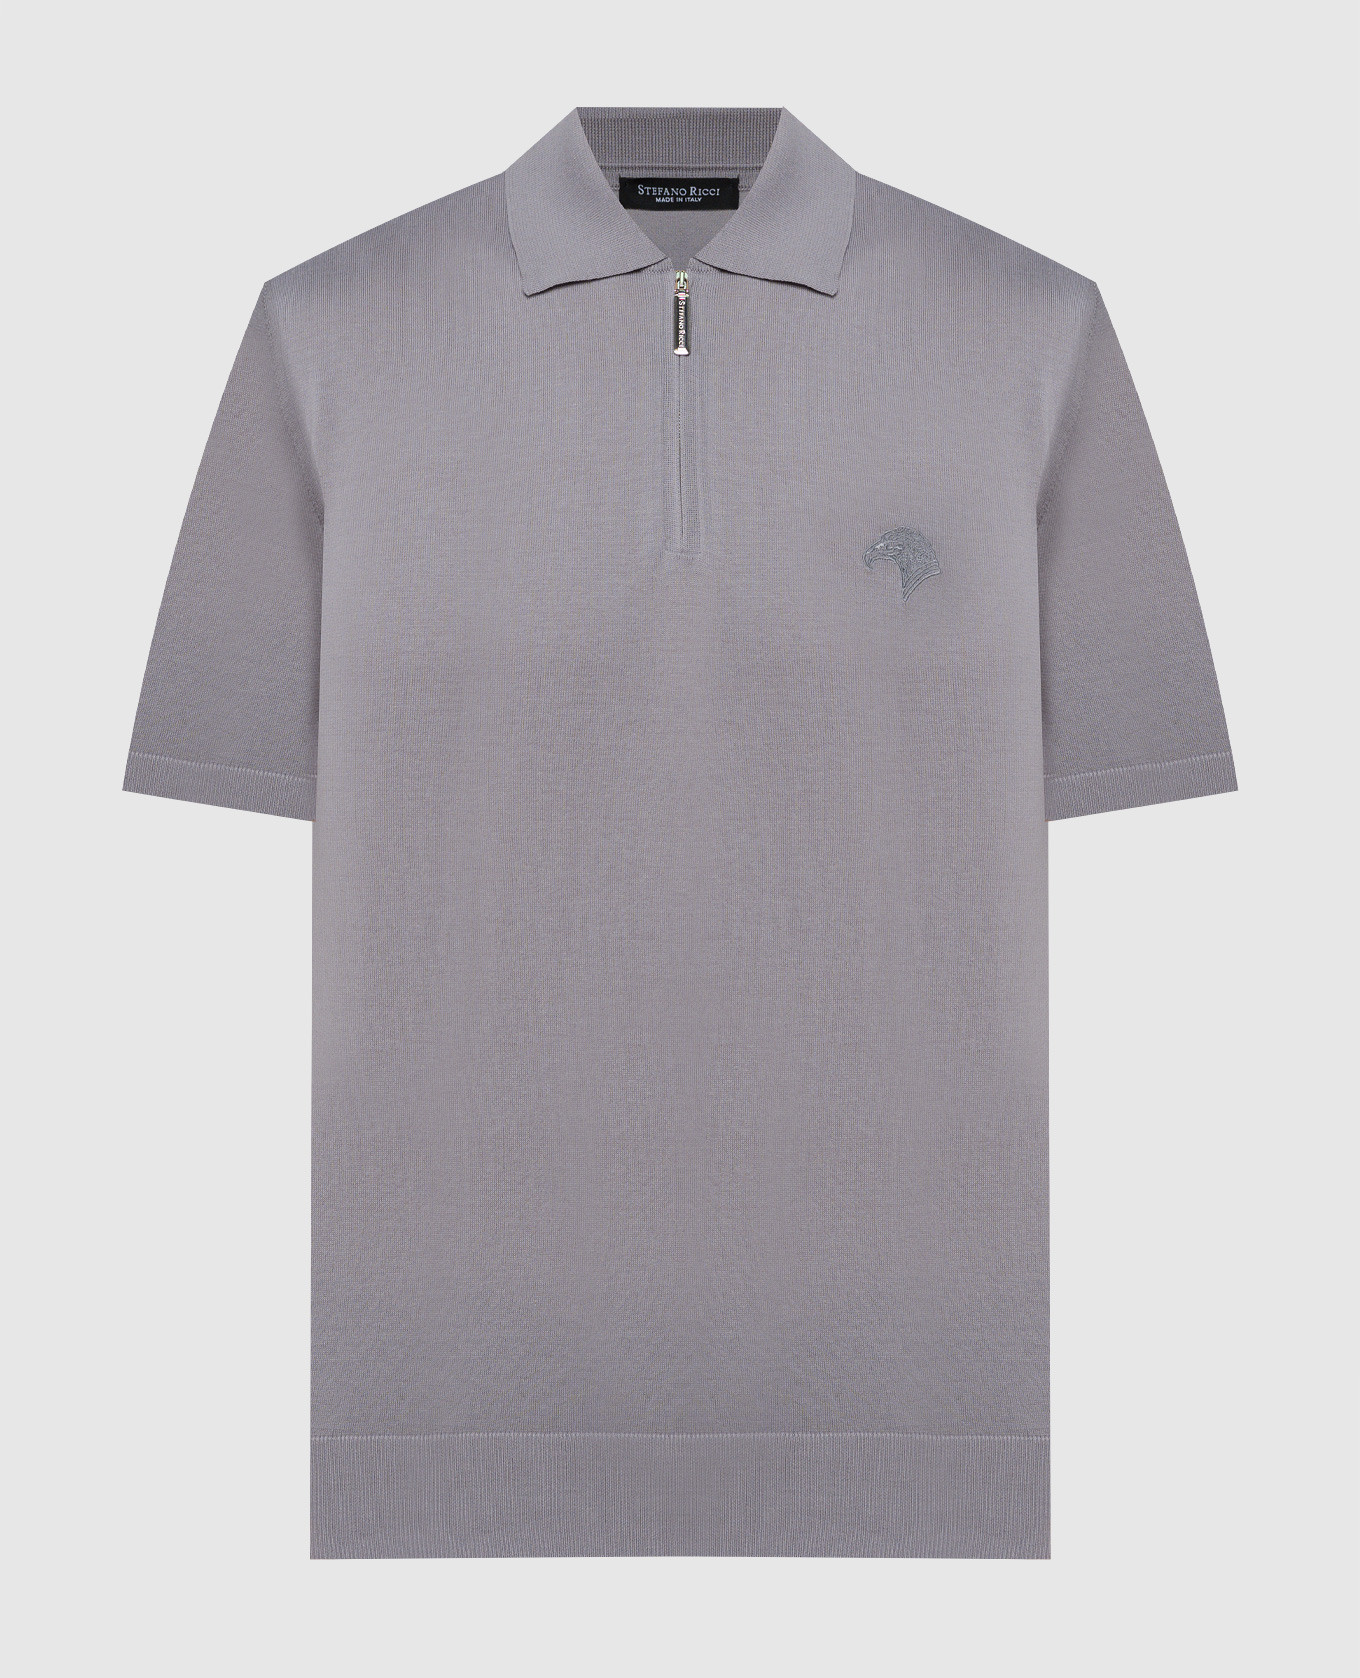 Gray polo with logo emblem embroidery